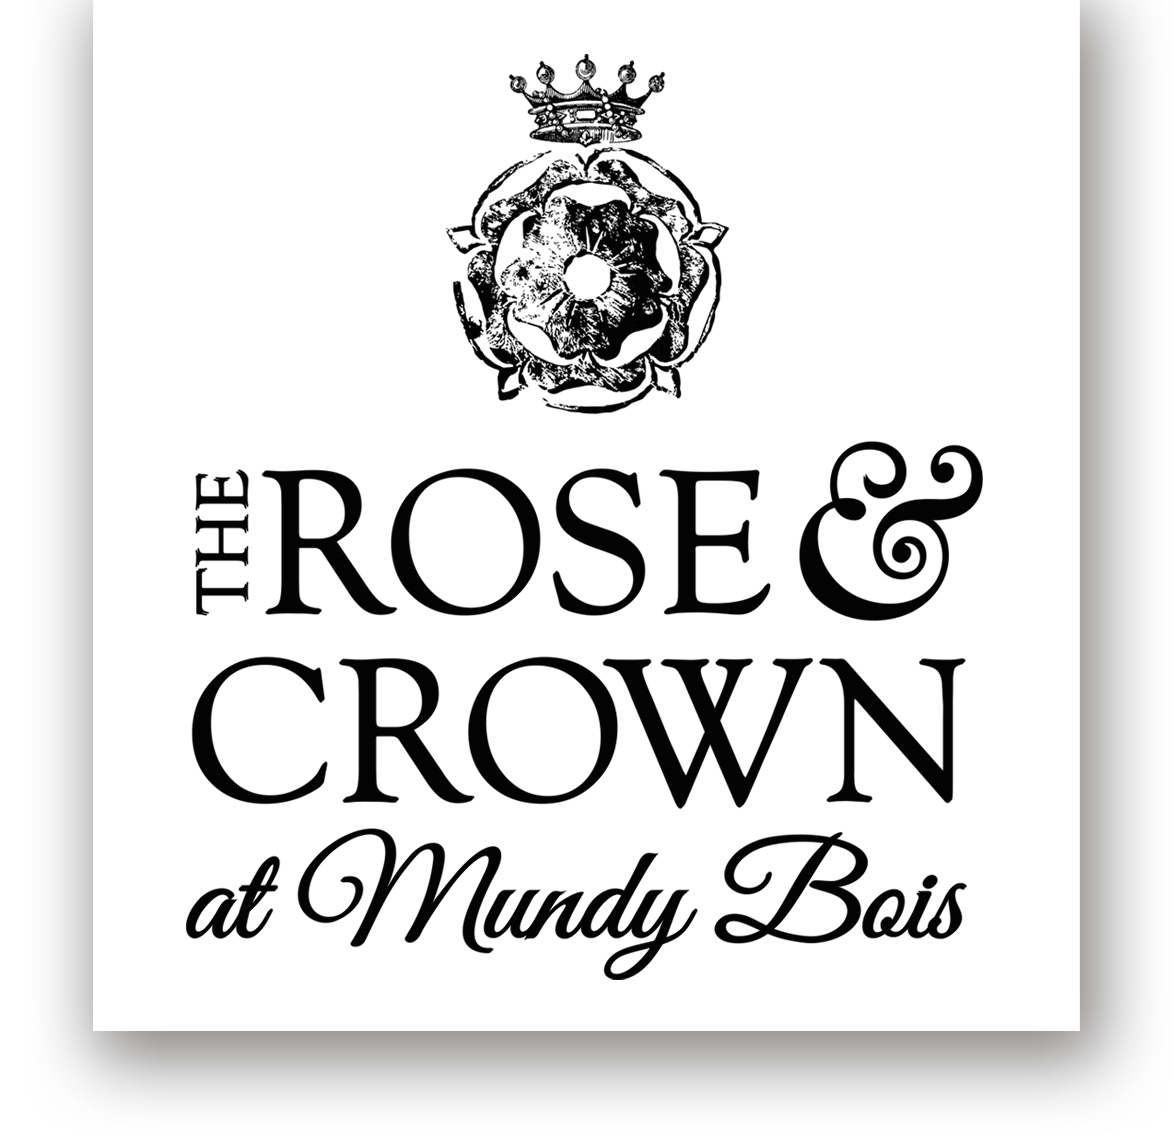 The Rose & Crown at Munday Bois